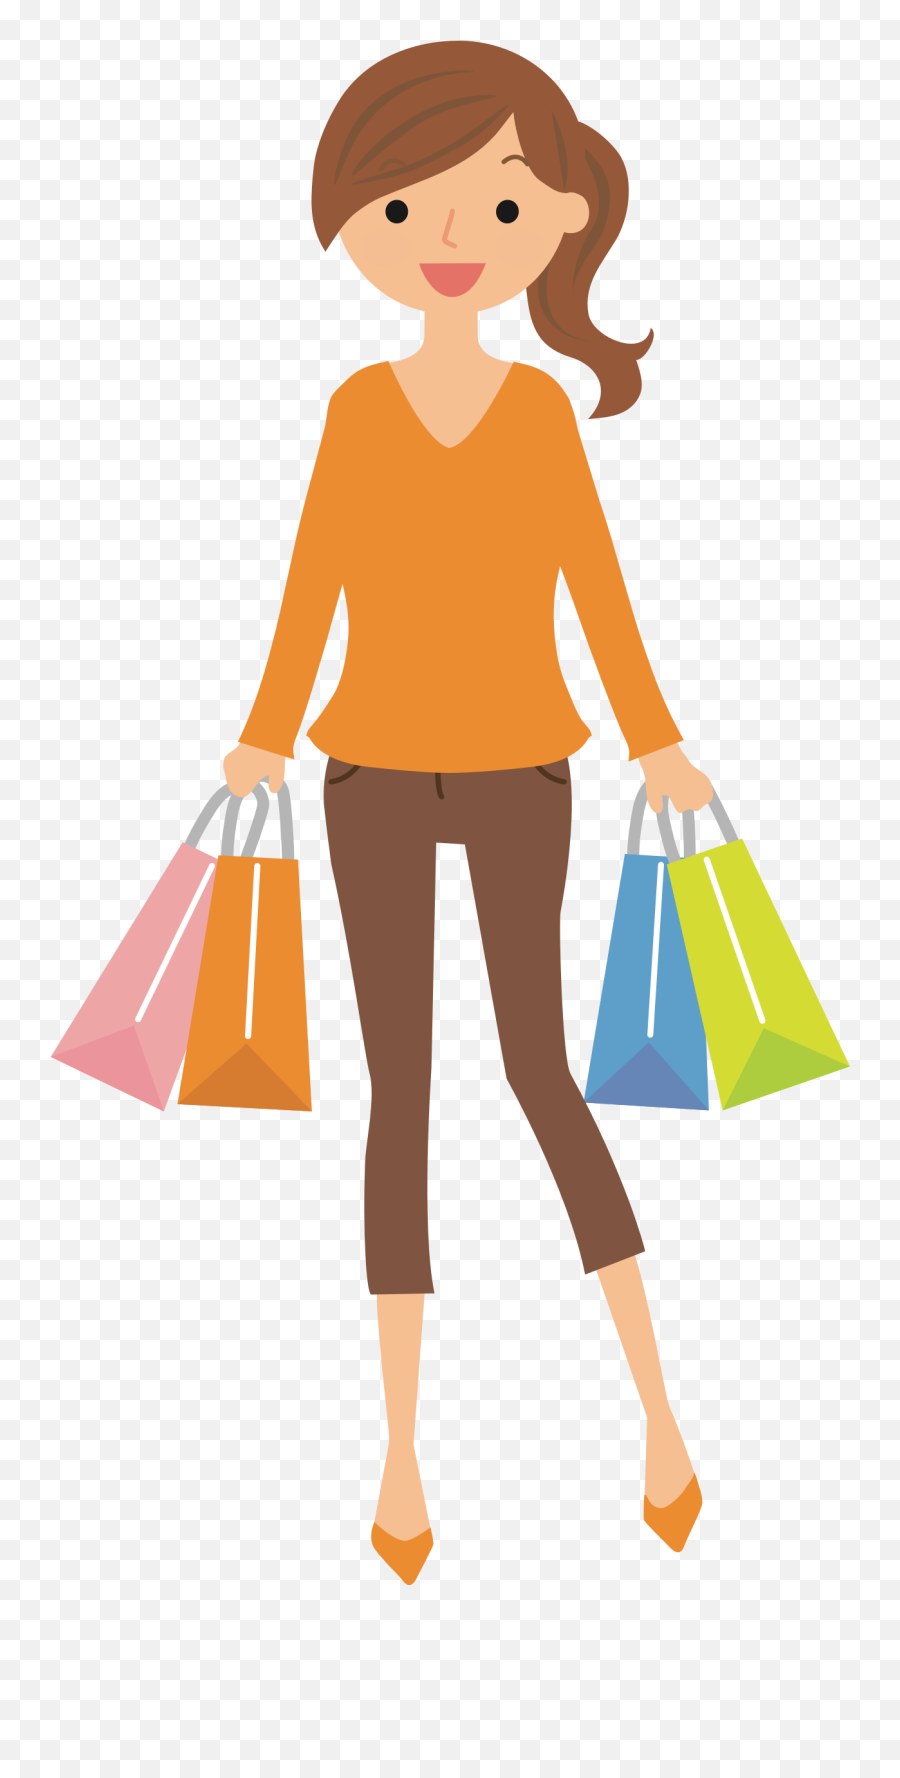 Surprise Clipart Uh Oh Surprise Uh Oh - Clip Art Woman Shopping Emoji,Uh Oh Emoji